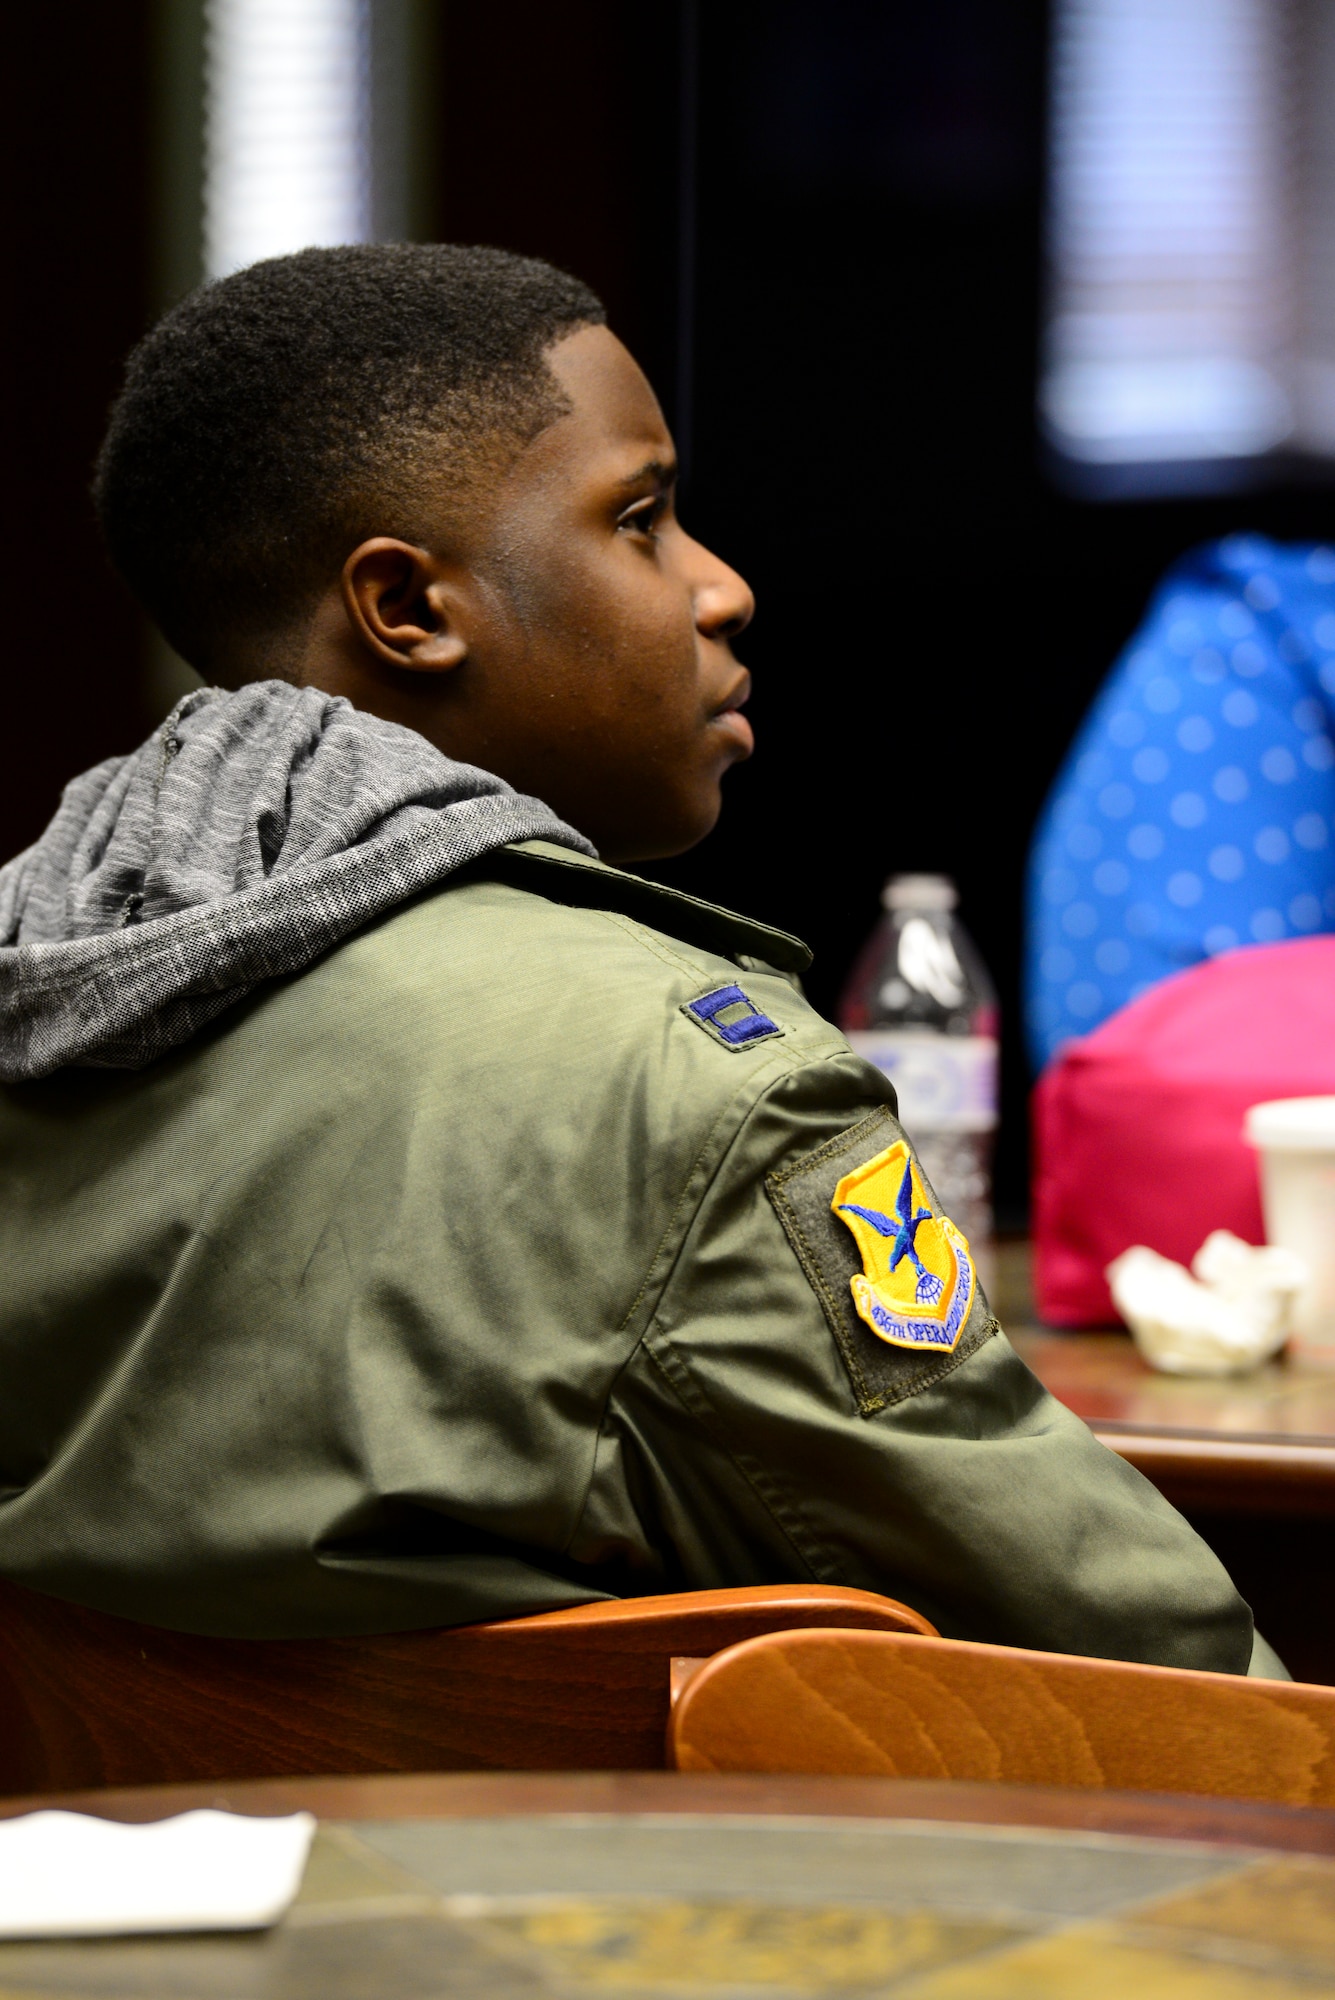 Kareem Bennett listens to a conversation March 16, 2018, in the 3rd Airlift Squadron heritage room on Dover Air Force Base, Del. Bennett was invited to spend a day with members of the 3rd AS and became an honorary pilot for the day. (U.S. Air Force photo by Staff Sgt. Aaron J. Jenne)